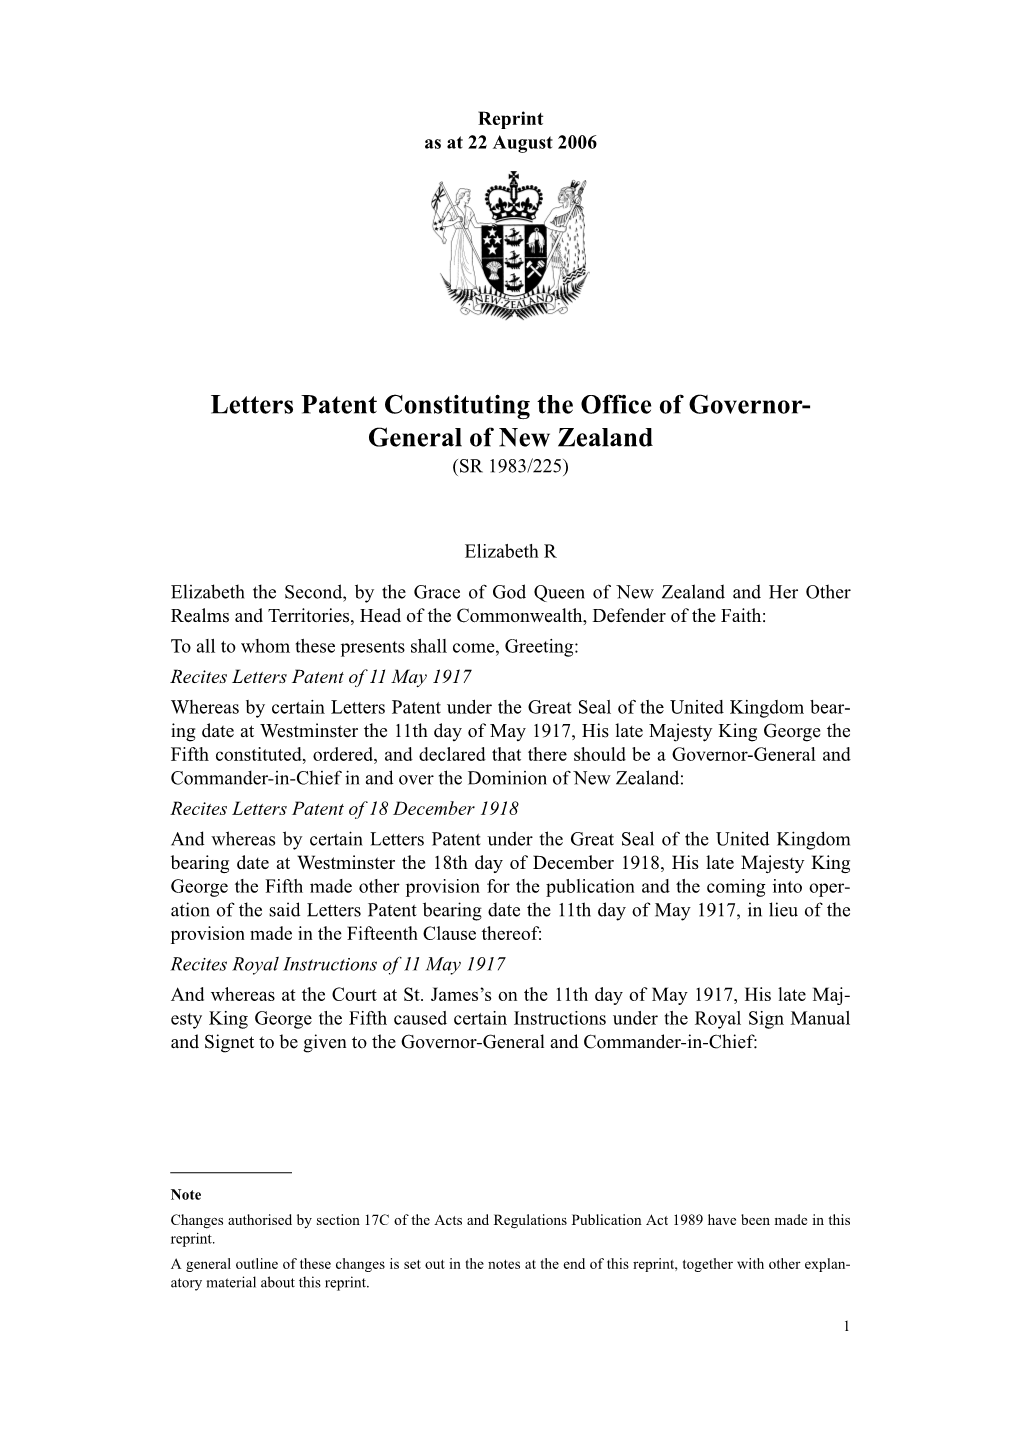 Letters Patent Constituting the Office of Governor- General of New Zealand (SR 1983/225)